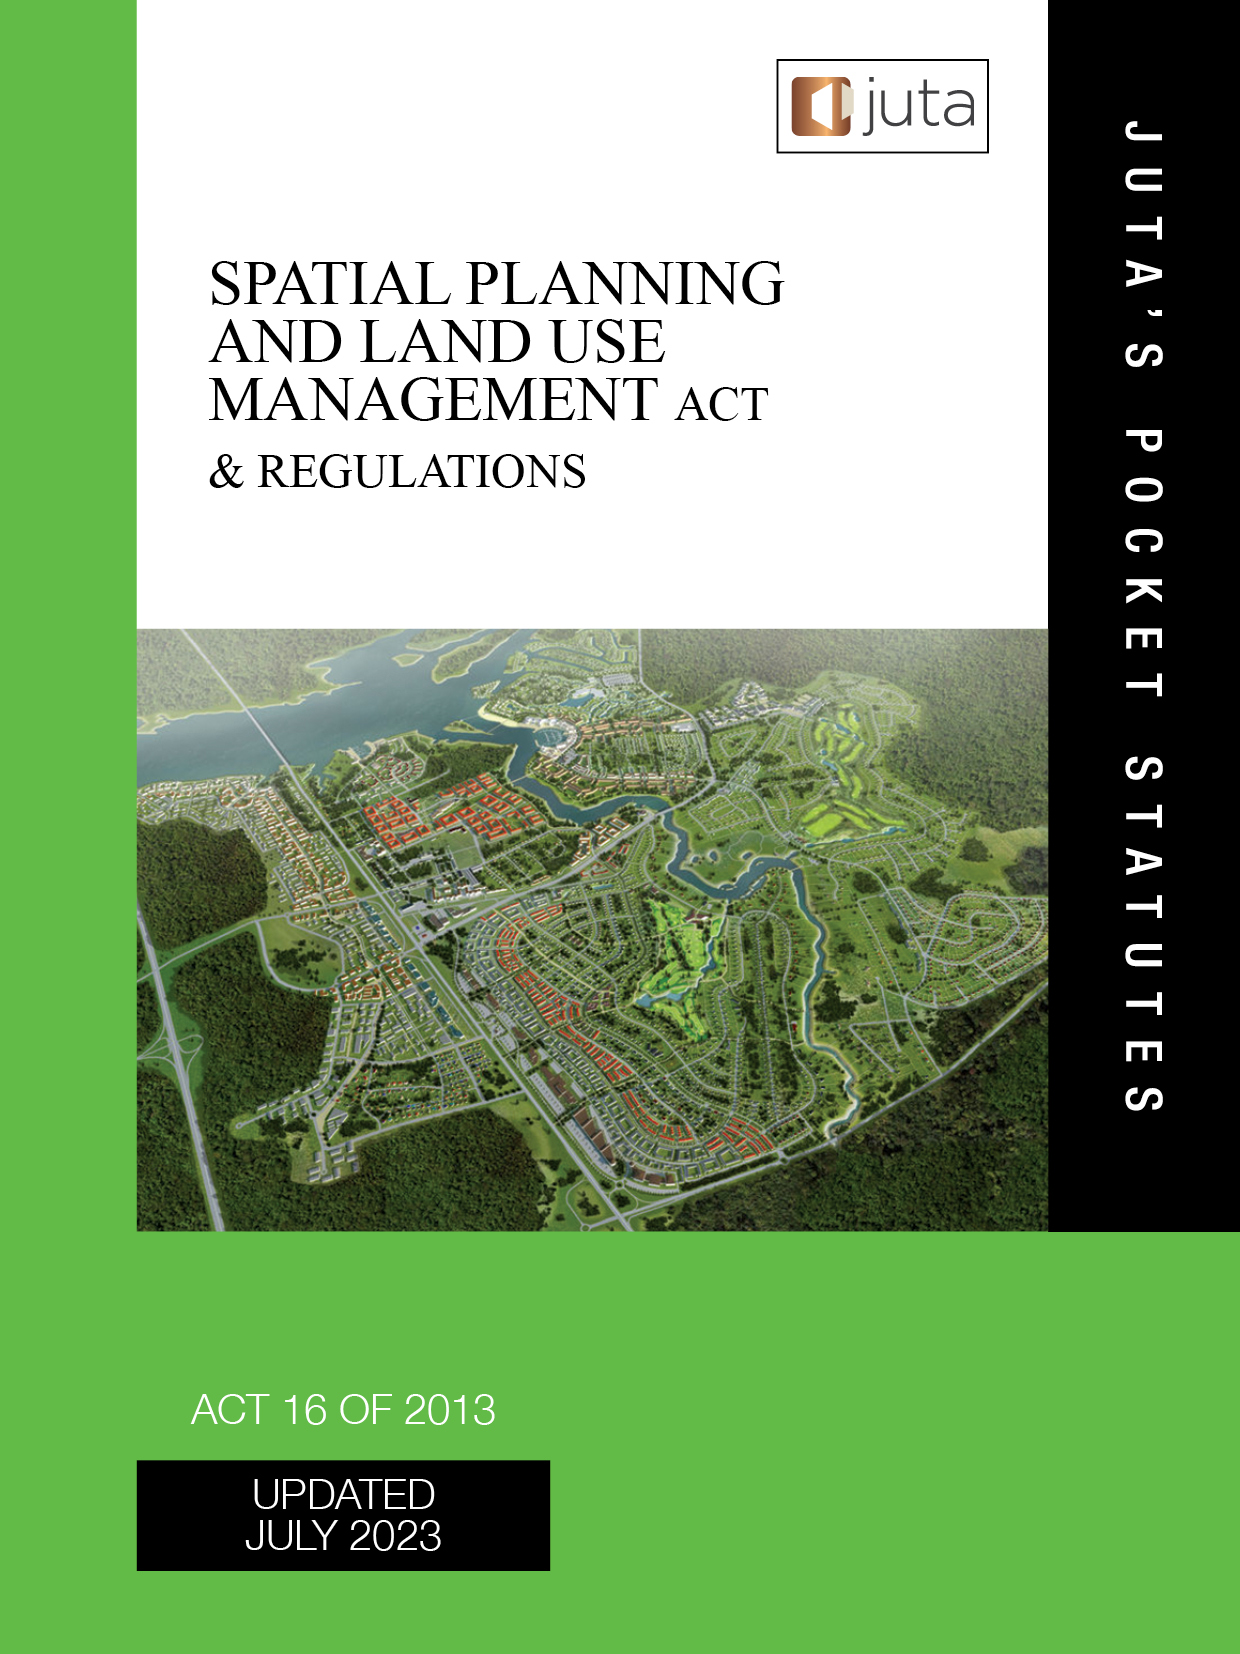 Spatial Planning and Land Use Management Act 16 of 2013 & Regulations